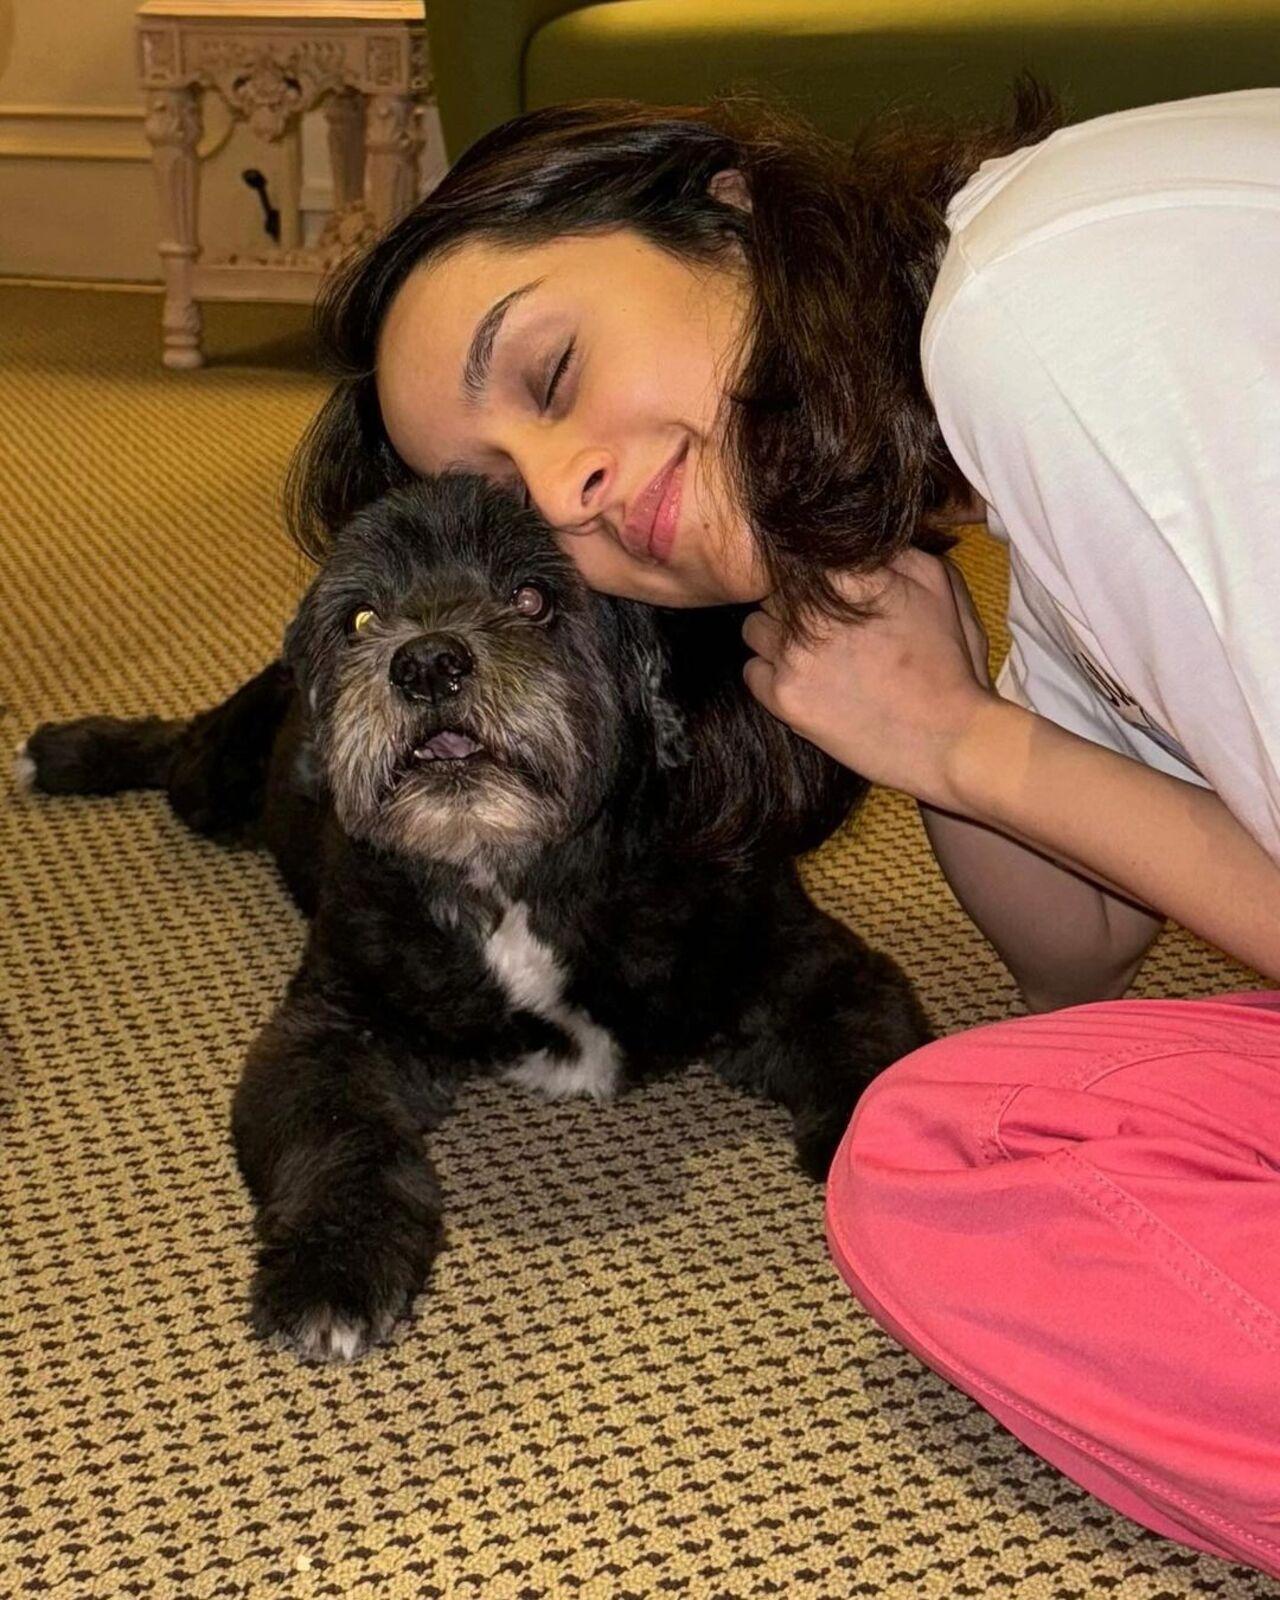 The actress is also up to date about the latest trends on social media. Sharing a picture with her pet dog, she wrote, 